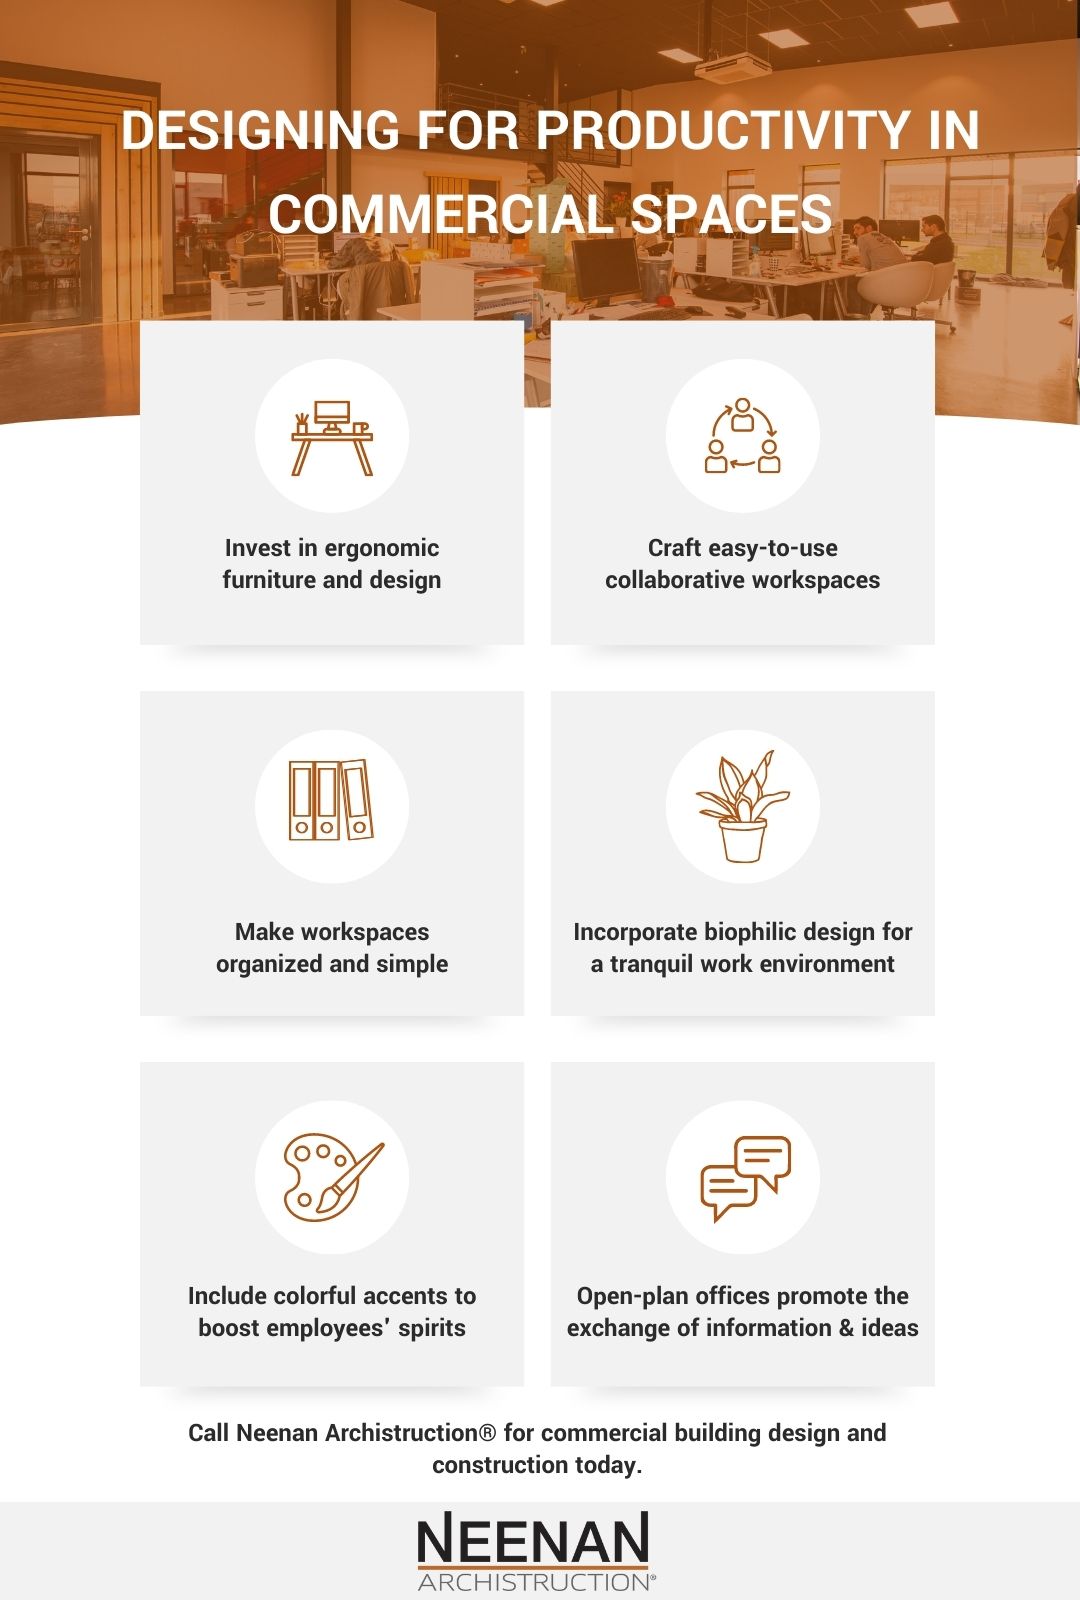 Designing for Productivity in Commercial Spaces Infographic